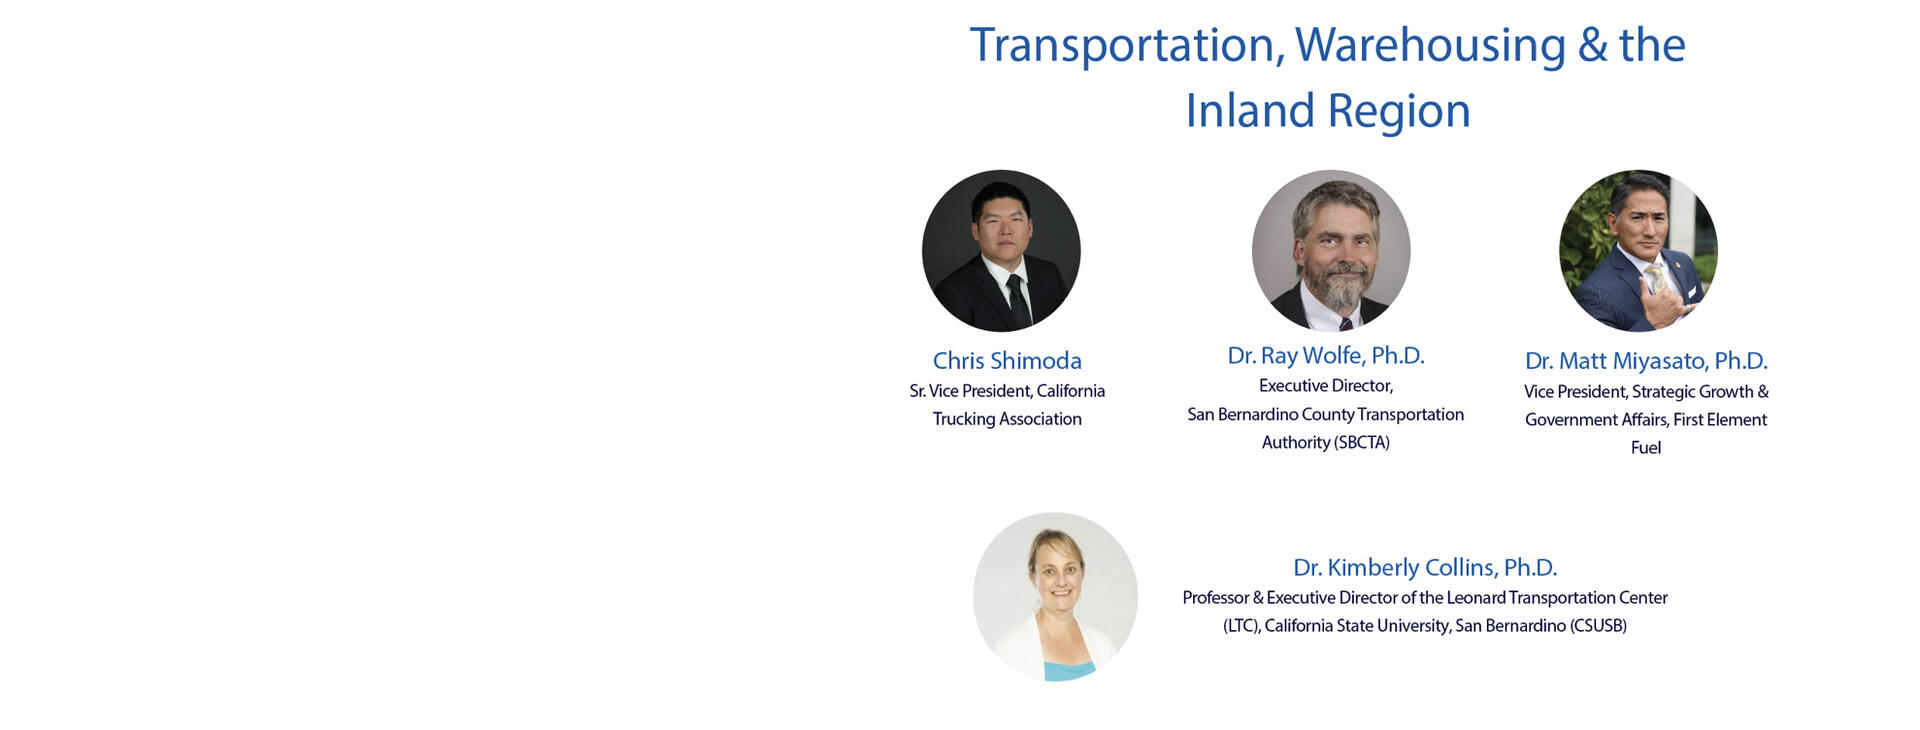 Warehousing Transportation Event: January 11th Featuring Dr. Ray Wolfe, Dr. Kimberly Collins, Dr. Matt Miyasato and Chris Shimoda